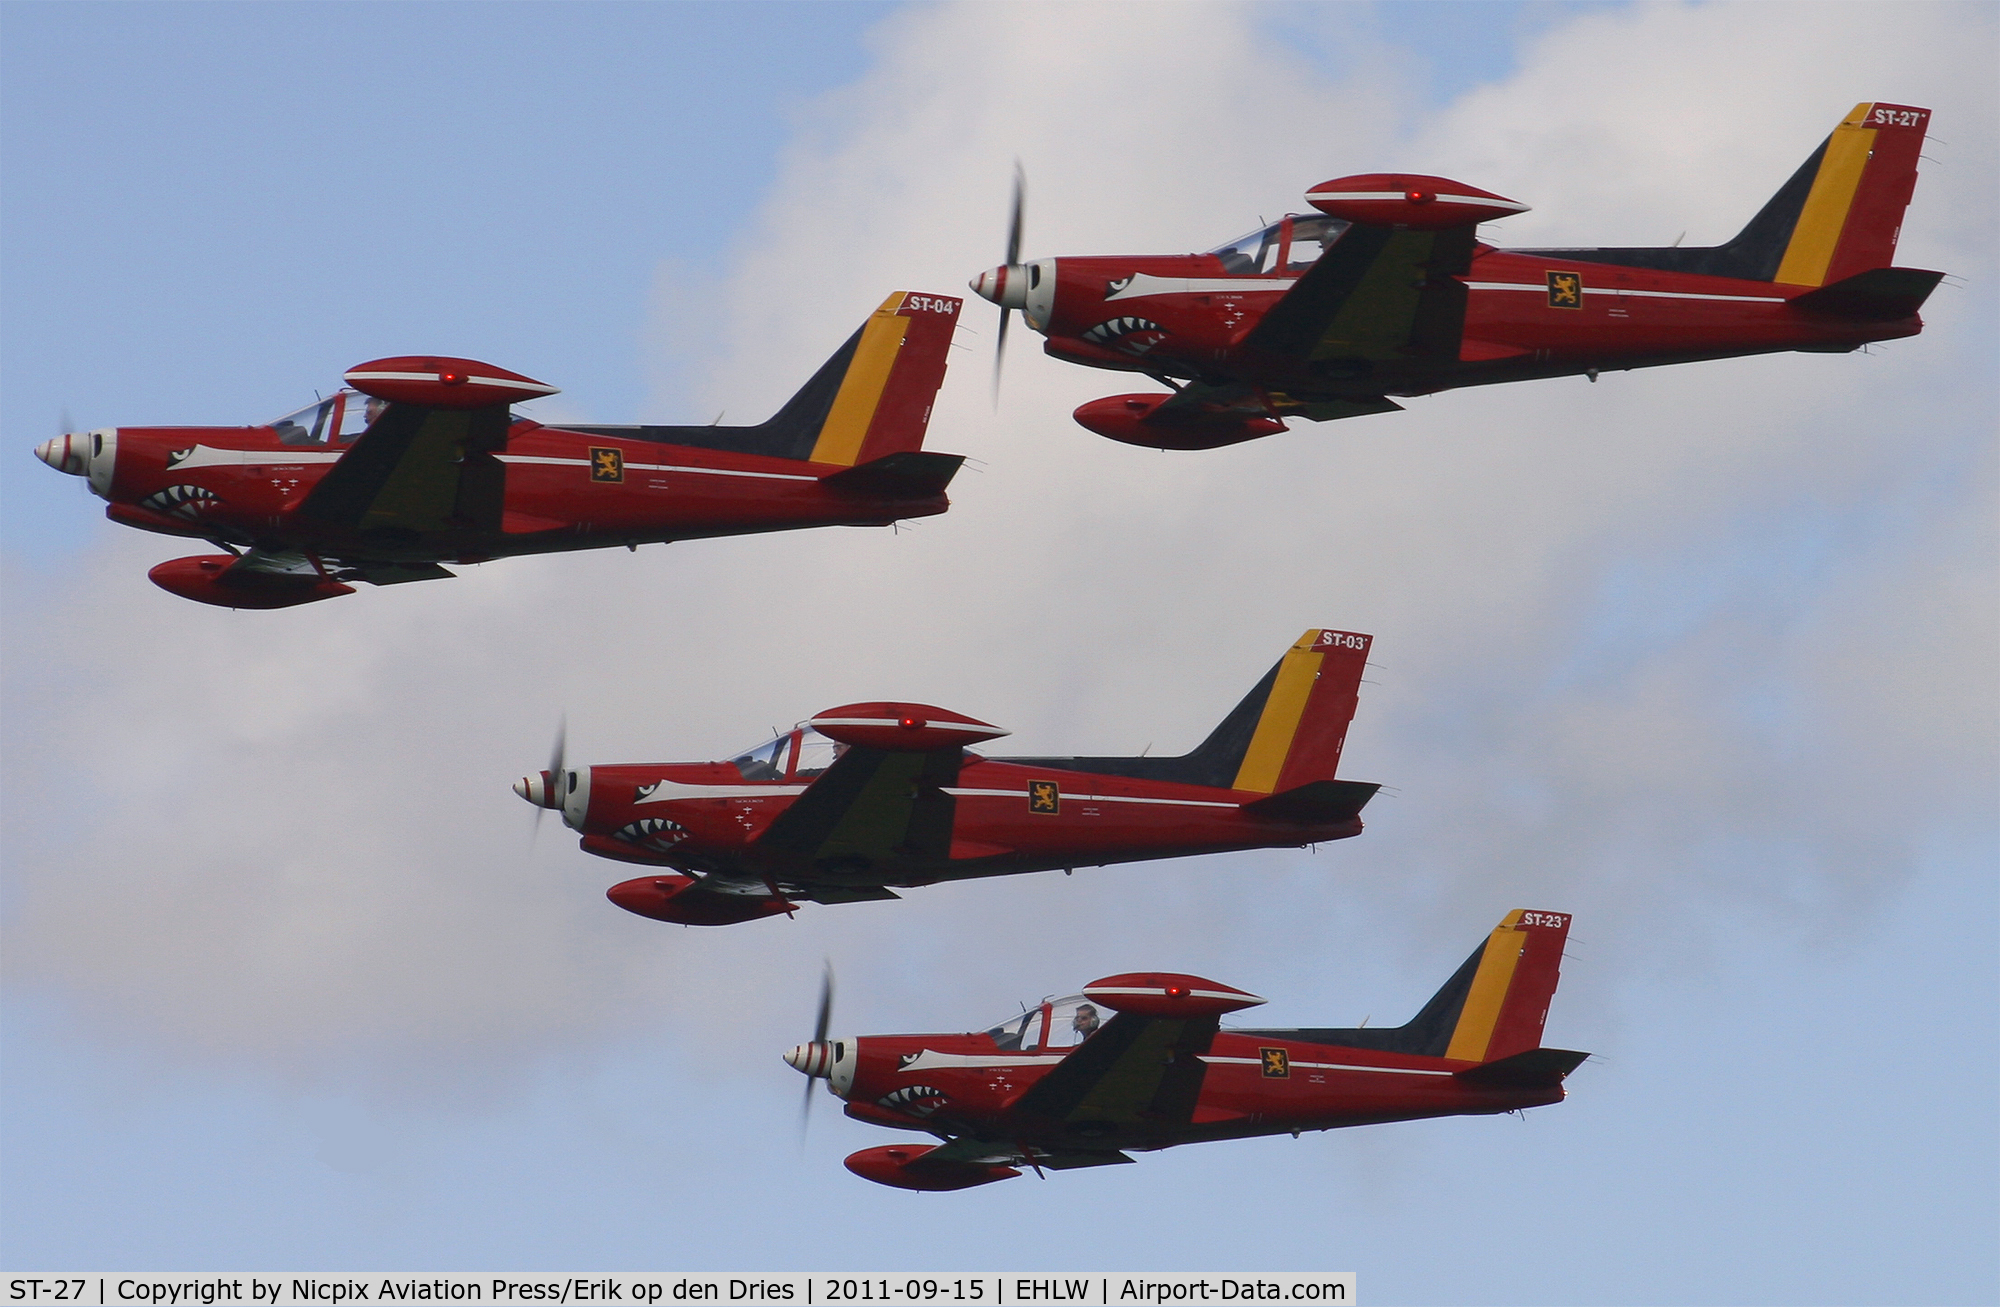 ST-27, SIAI-Marchetti SF-260M C/N 10-27, The Belgium AF display team the Red Devils in action at Leeuwarden AB.